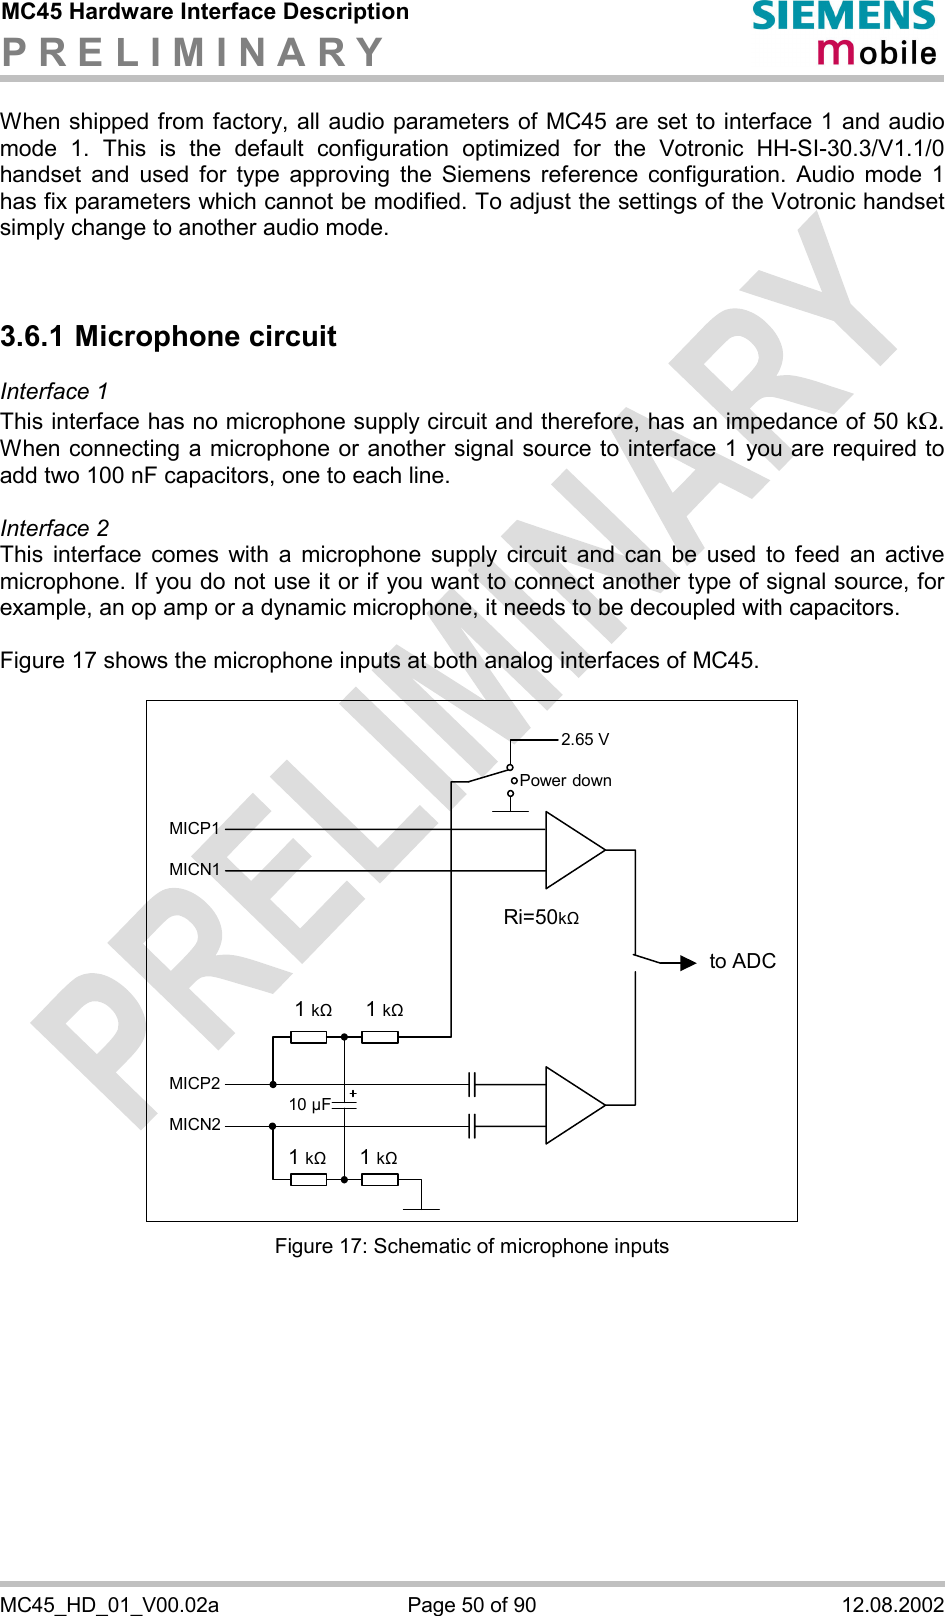 MC45 Hardware Interface Description P R E L I M I N A R Y      MC45_HD_01_V00.02a  Page 50 of 90  12.08.2002 When shipped from factory, all audio parameters of MC45 are set to interface 1 and audio mode 1. This is the default configuration optimized for the Votronic HH-SI-30.3/V1.1/0 handset and used for type approving the Siemens reference configuration. Audio mode 1 has fix parameters which cannot be modified. To adjust the settings of the Votronic handset simply change to another audio mode.   3.6.1 Microphone circuit Interface 1  This interface has no microphone supply circuit and therefore, has an impedance of 50 kW. When connecting a microphone or another signal source to interface 1 you are required to add two 100 nF capacitors, one to each line.   Interface 2 This interface comes with a microphone supply circuit and can be used to feed an active microphone. If you do not use it or if you want to connect another type of signal source, for example, an op amp or a dynamic microphone, it needs to be decoupled with capacitors.  Figure 17 shows the microphone inputs at both analog interfaces of MC45.    2.65 V to ADC Power downMICP1MICN1MICP2MICN21 k&quot;   1 k&quot;1 k&quot; 1 k&quot;10 µF Ri=50k&quot; Figure 17: Schematic of microphone inputs   